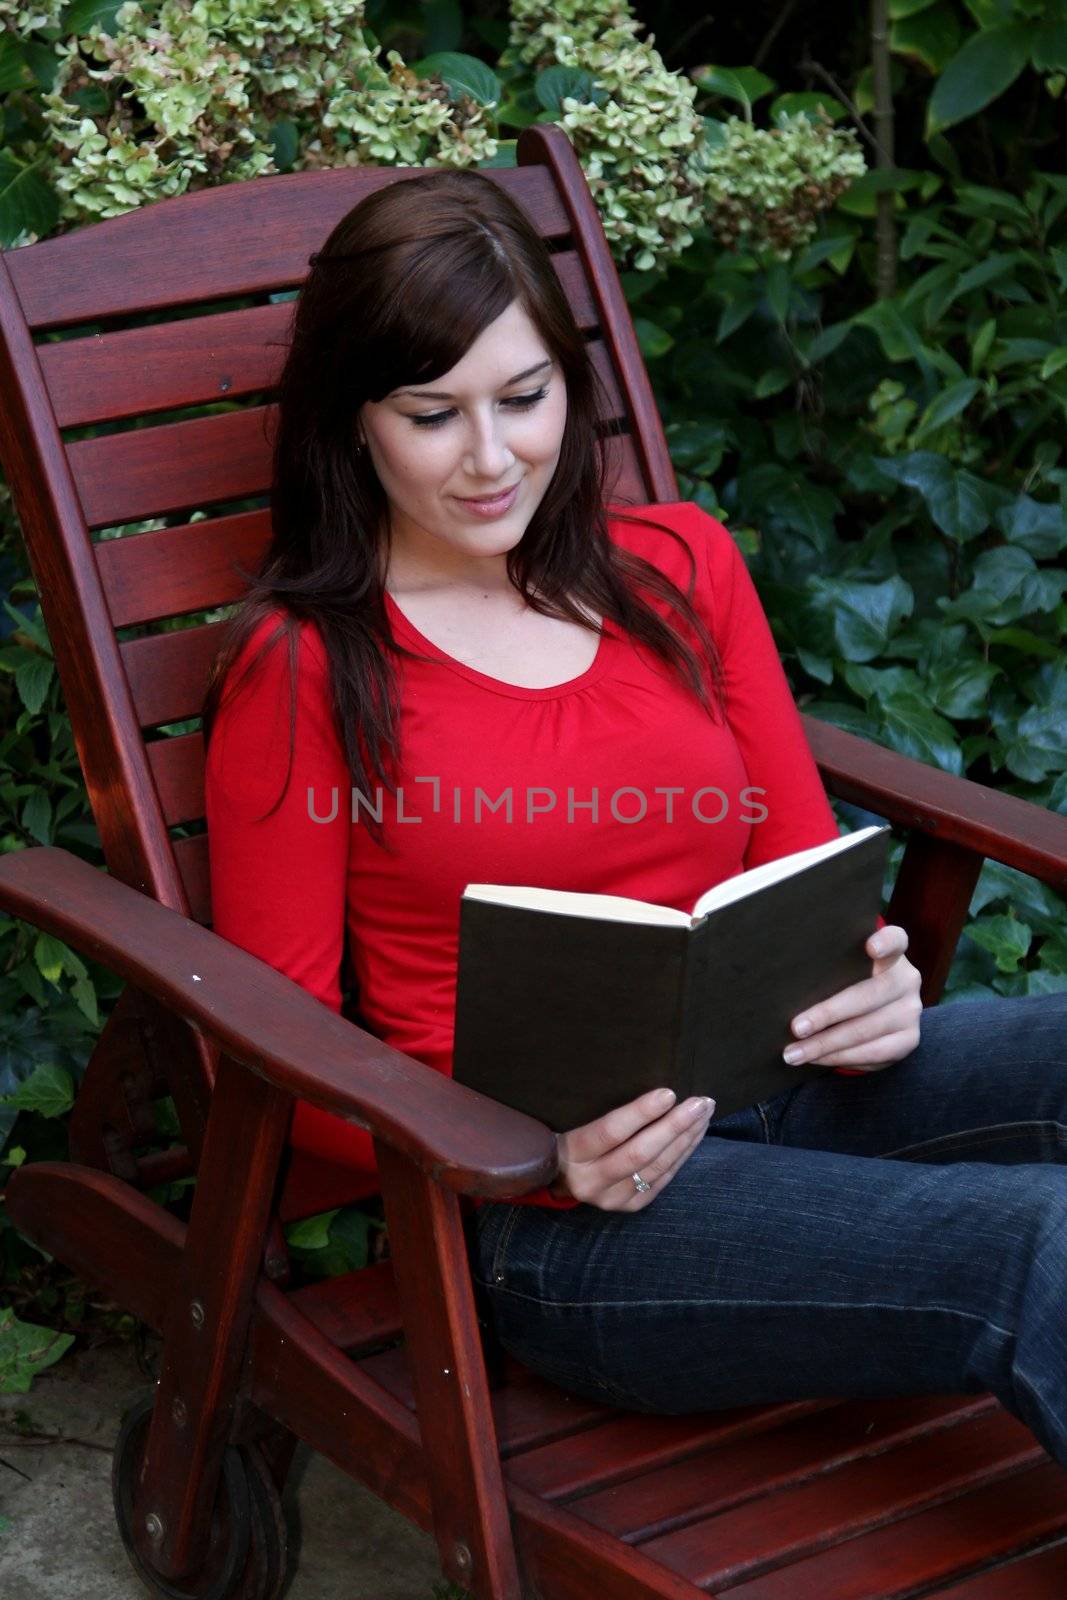 Gorgeous brunette woman on wooden slatted chair reading a book